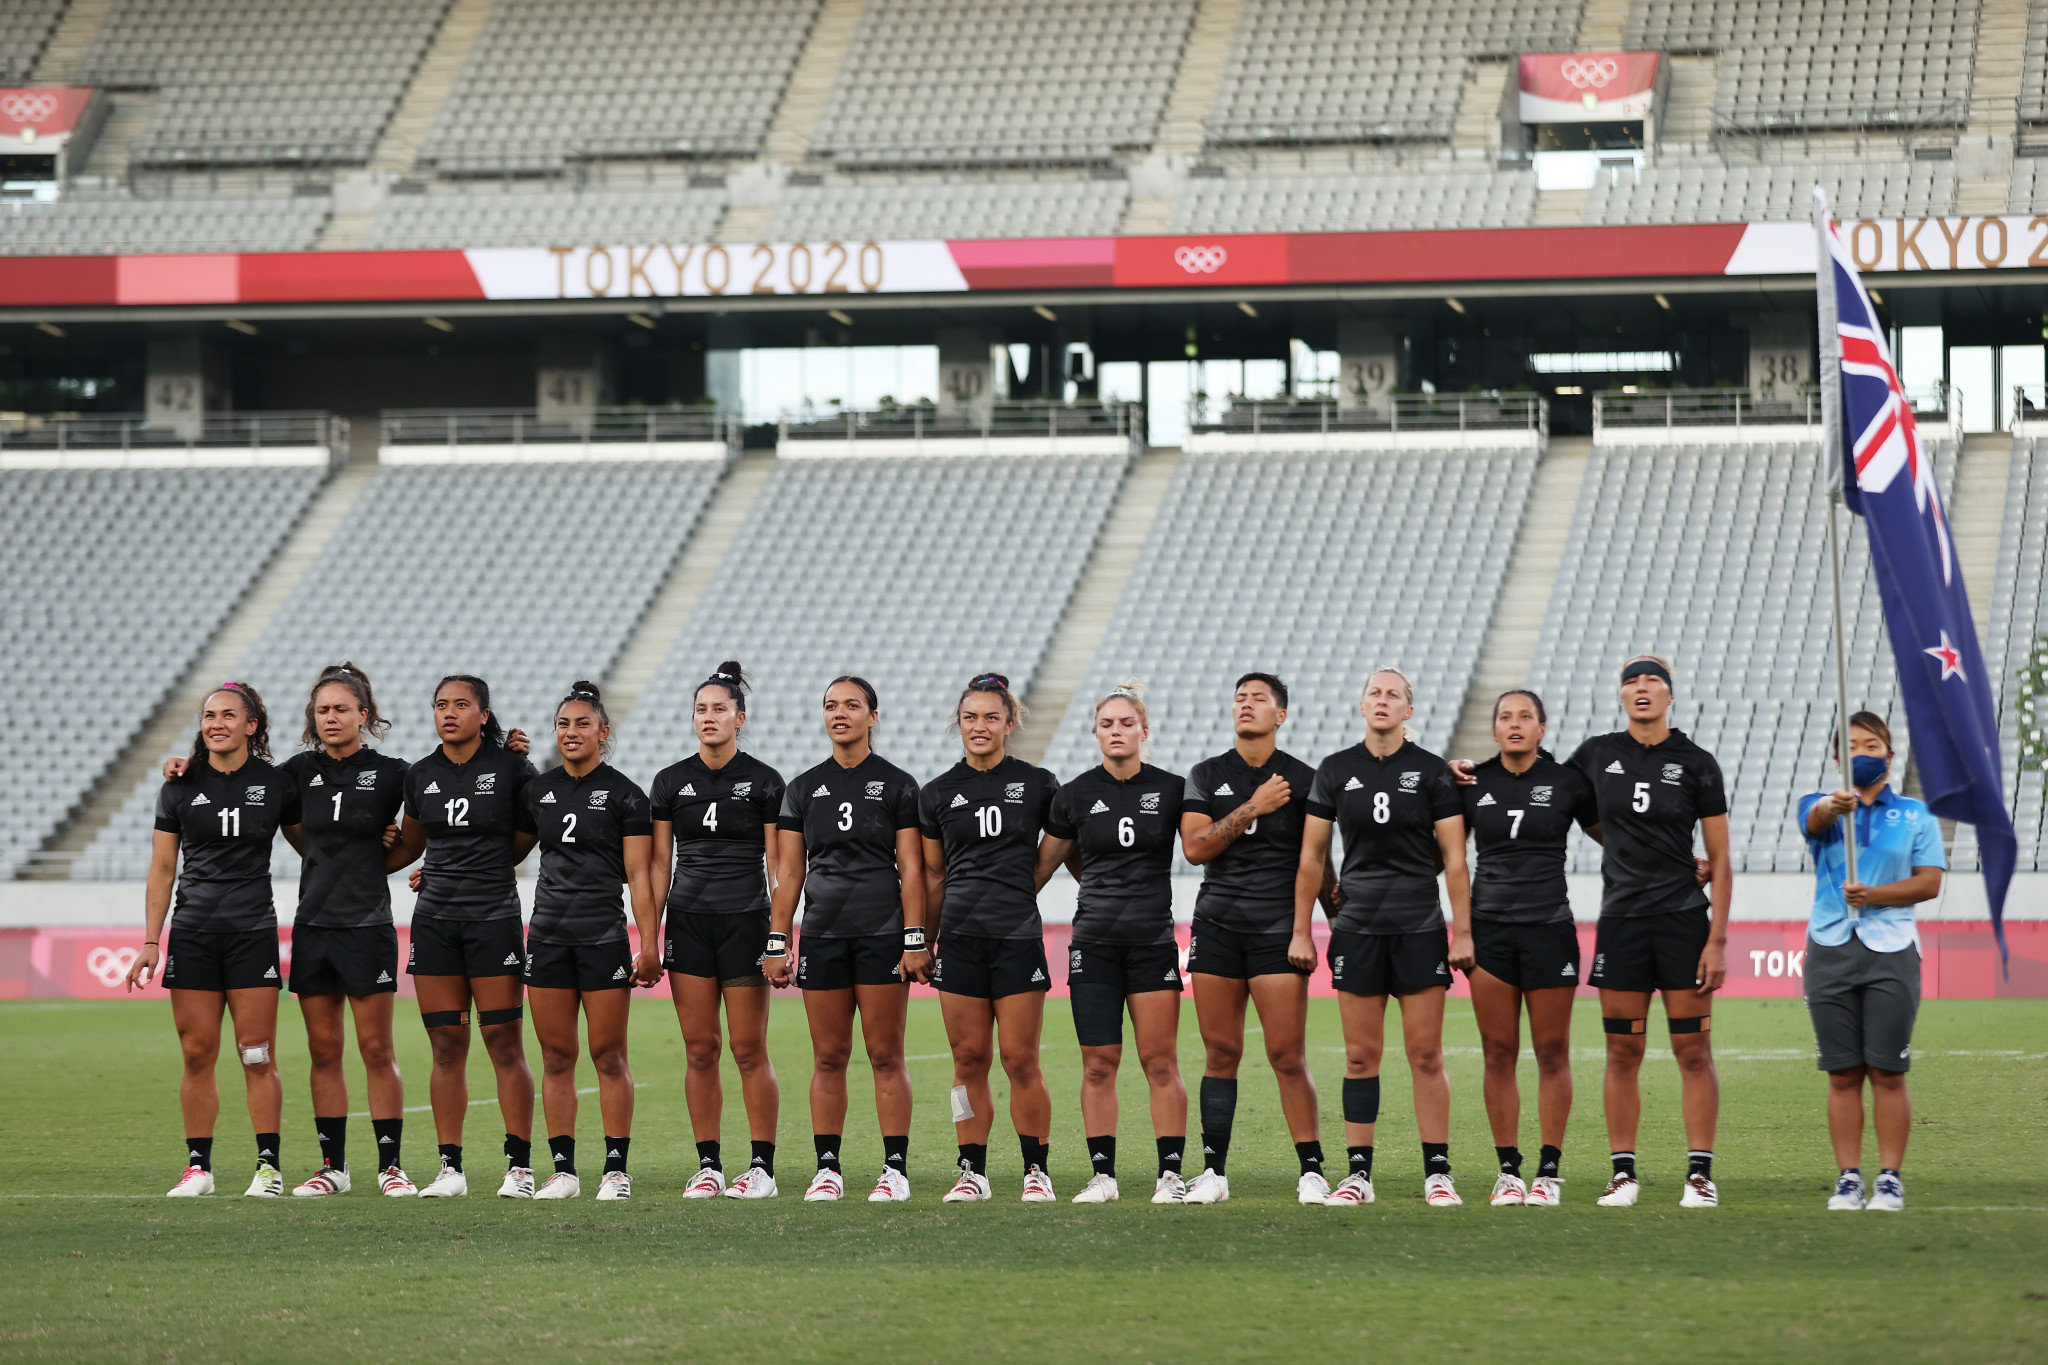 New Zealand's women beat France in the rugby sevens final at Tokyo 2020 ©Getty Images